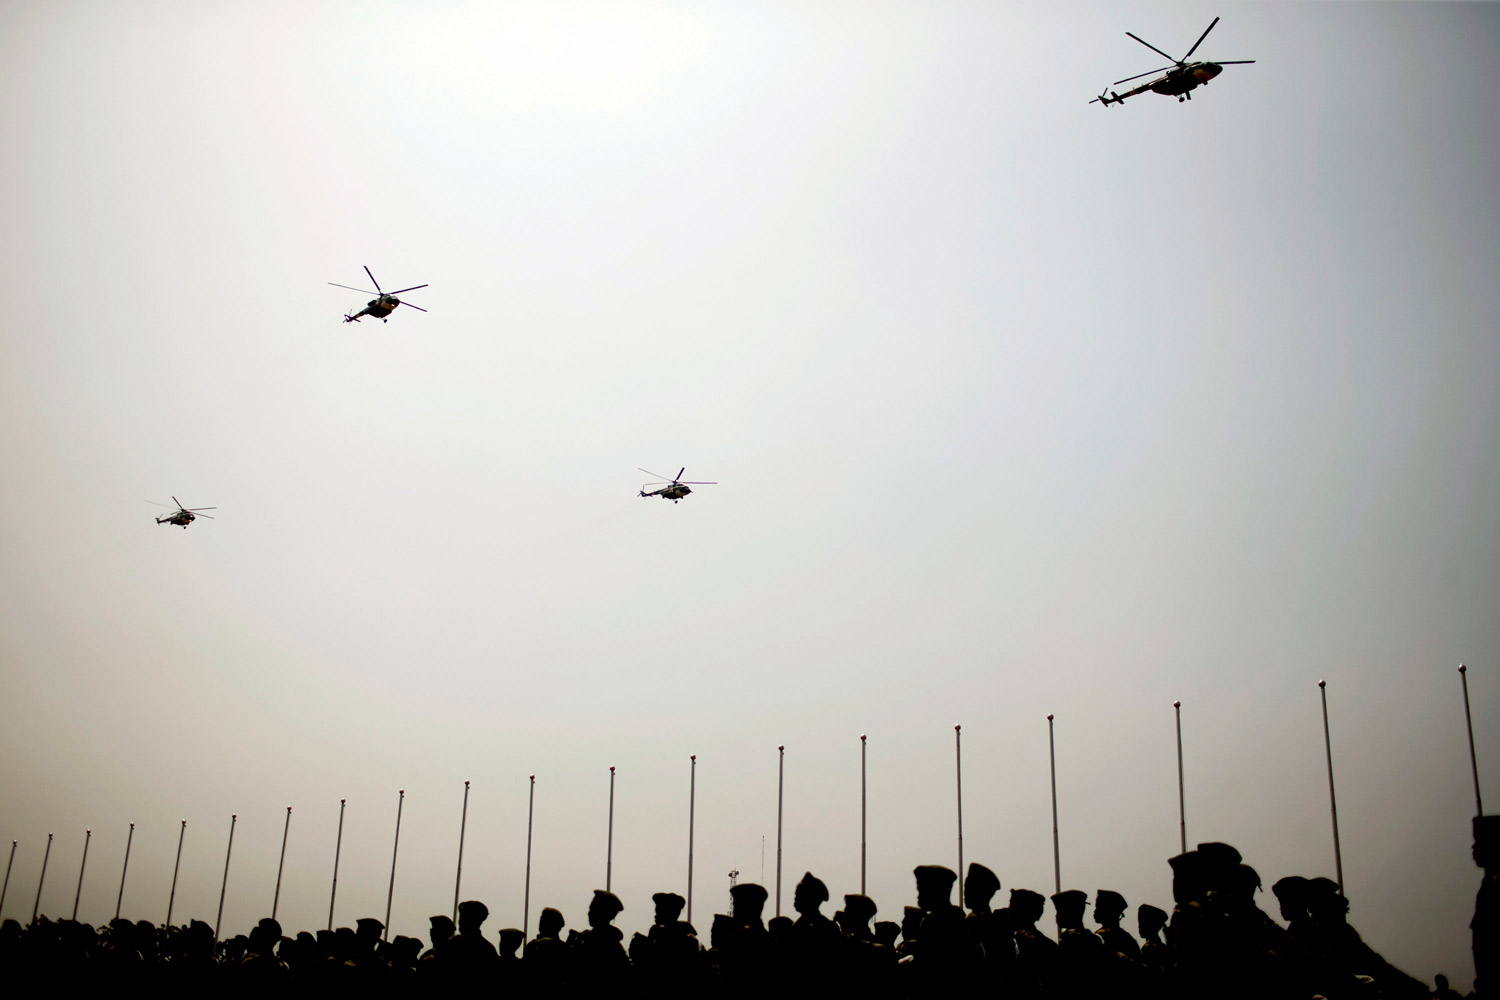 July 7, 2011. Southern Sudanese military helicopters fly over an independence rehearsal procession in Juba, southern Sudan. The Government of Southern Sudan is making lavish preparations to celebrate its declaration of independence from the north on July, 9.